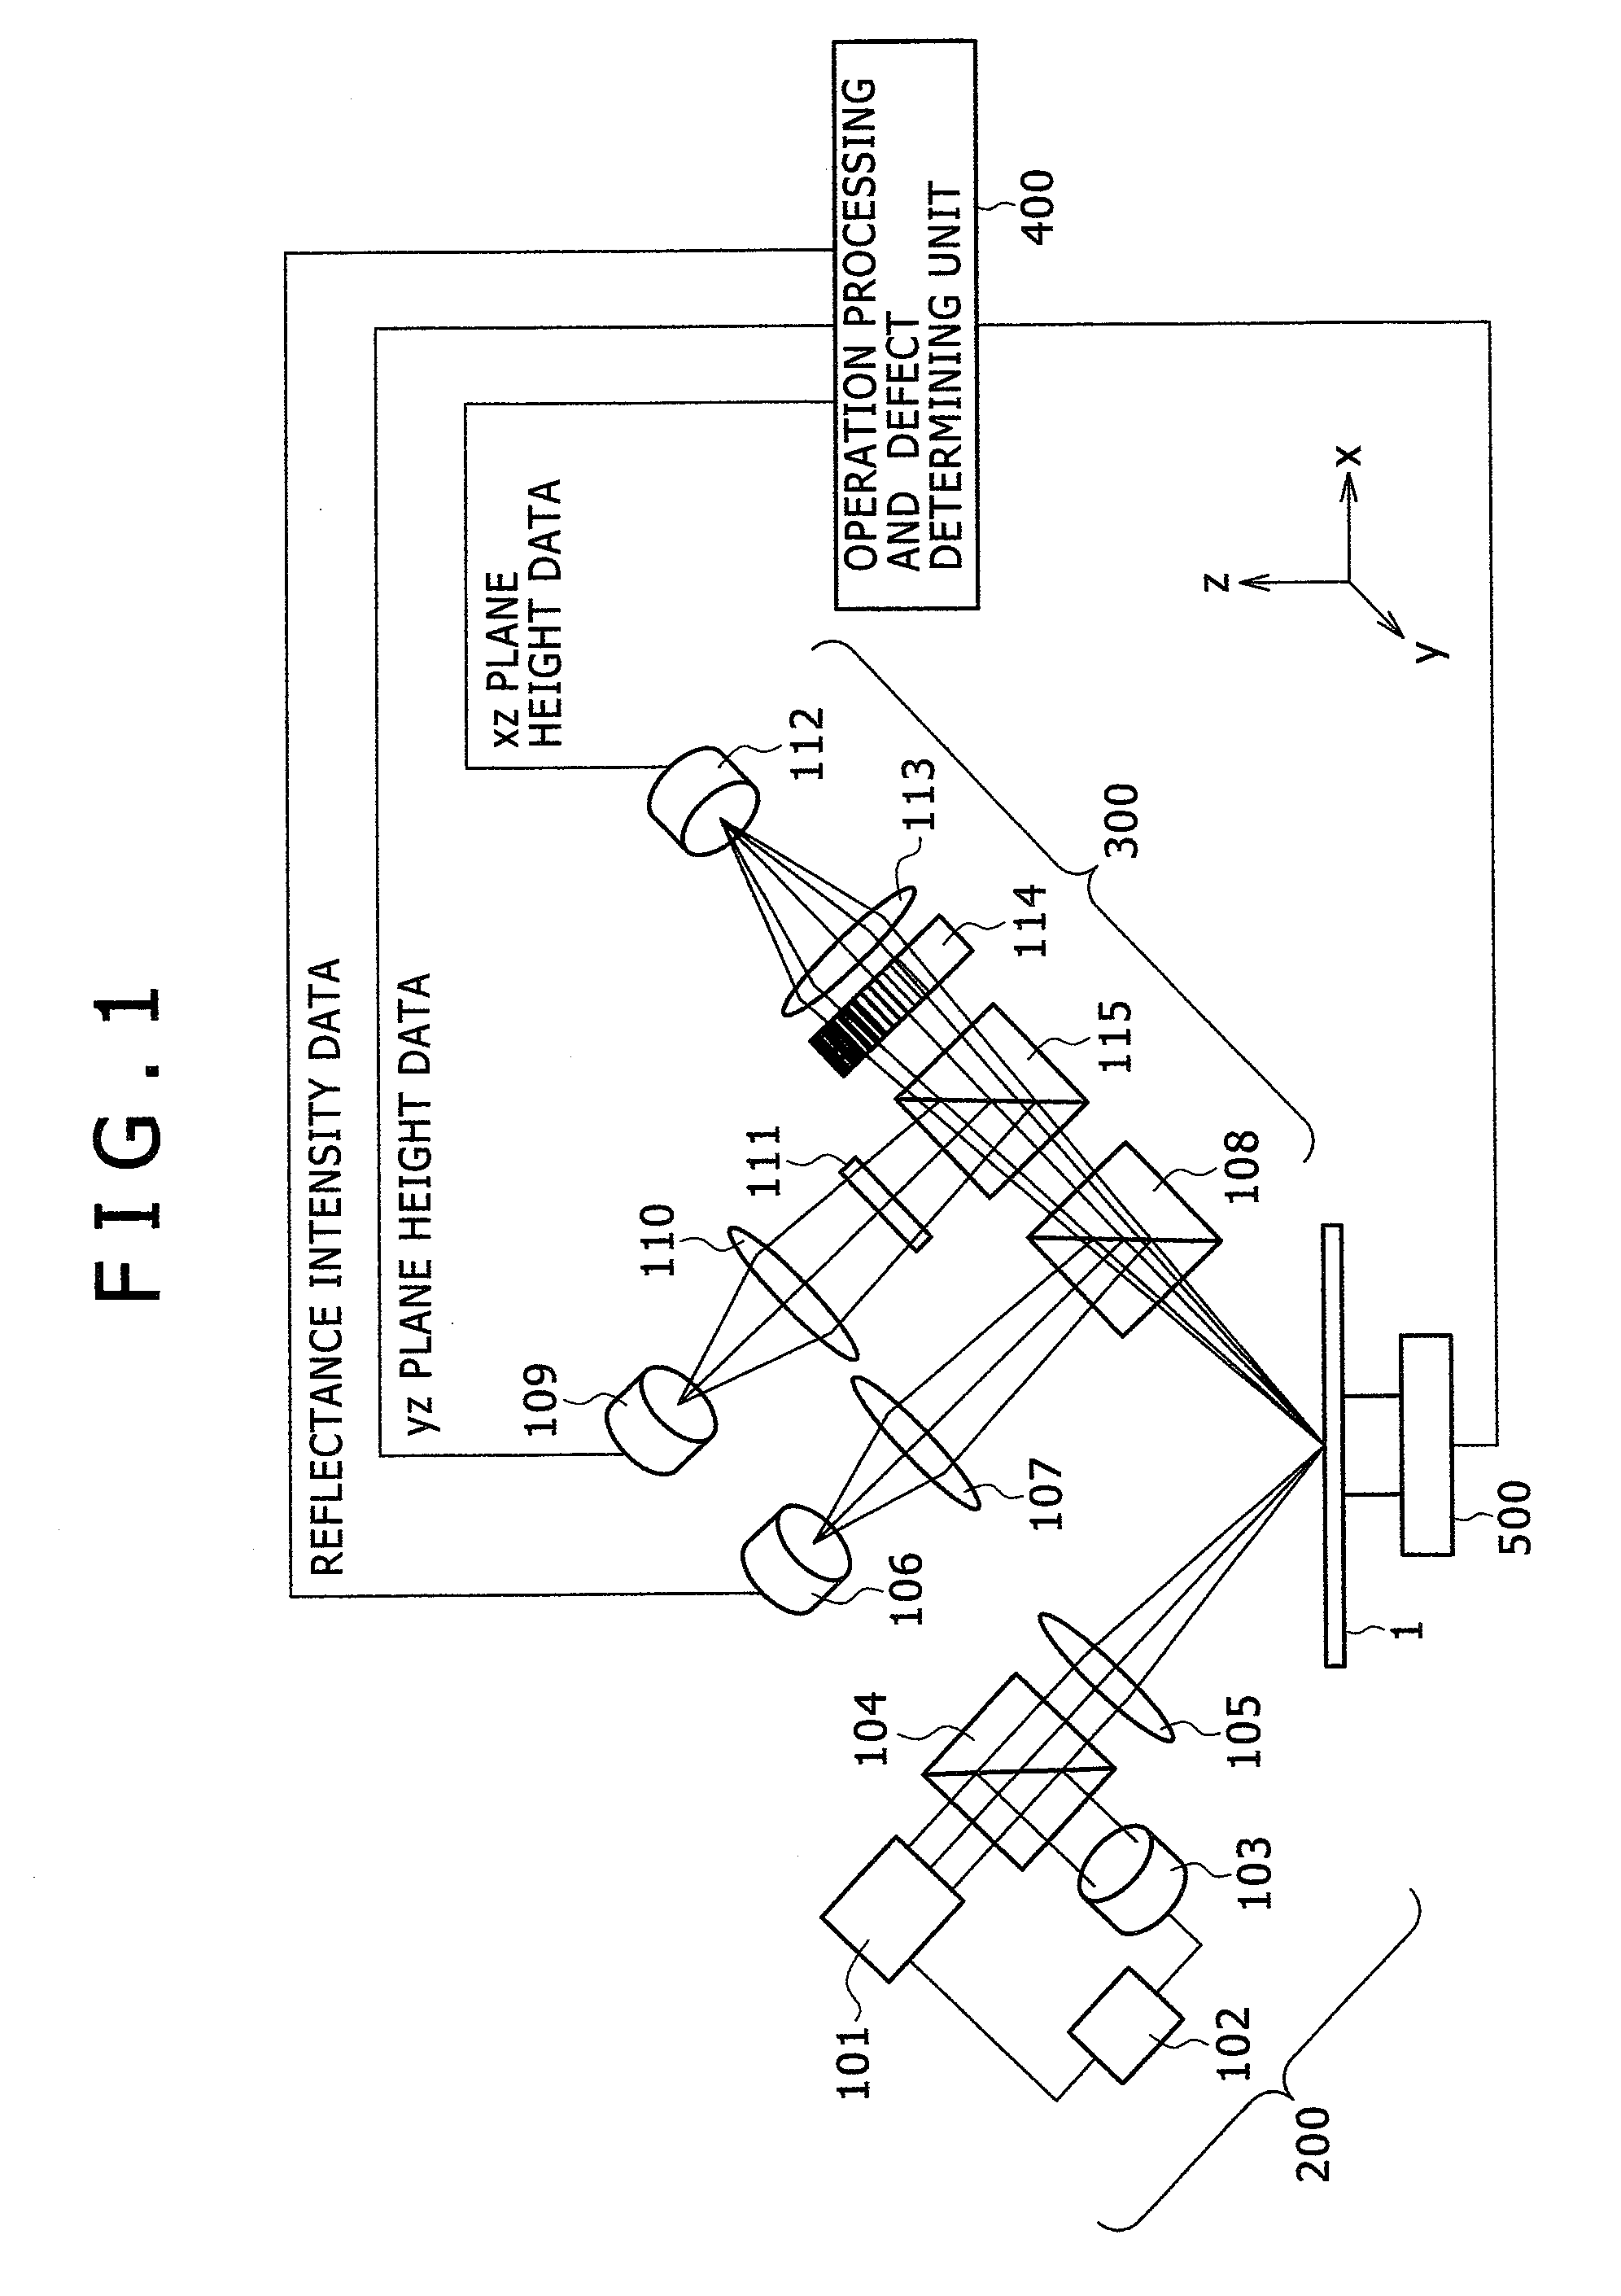 Surface defect inspecting apparatus with defect detection optical system and defect-detected image processing